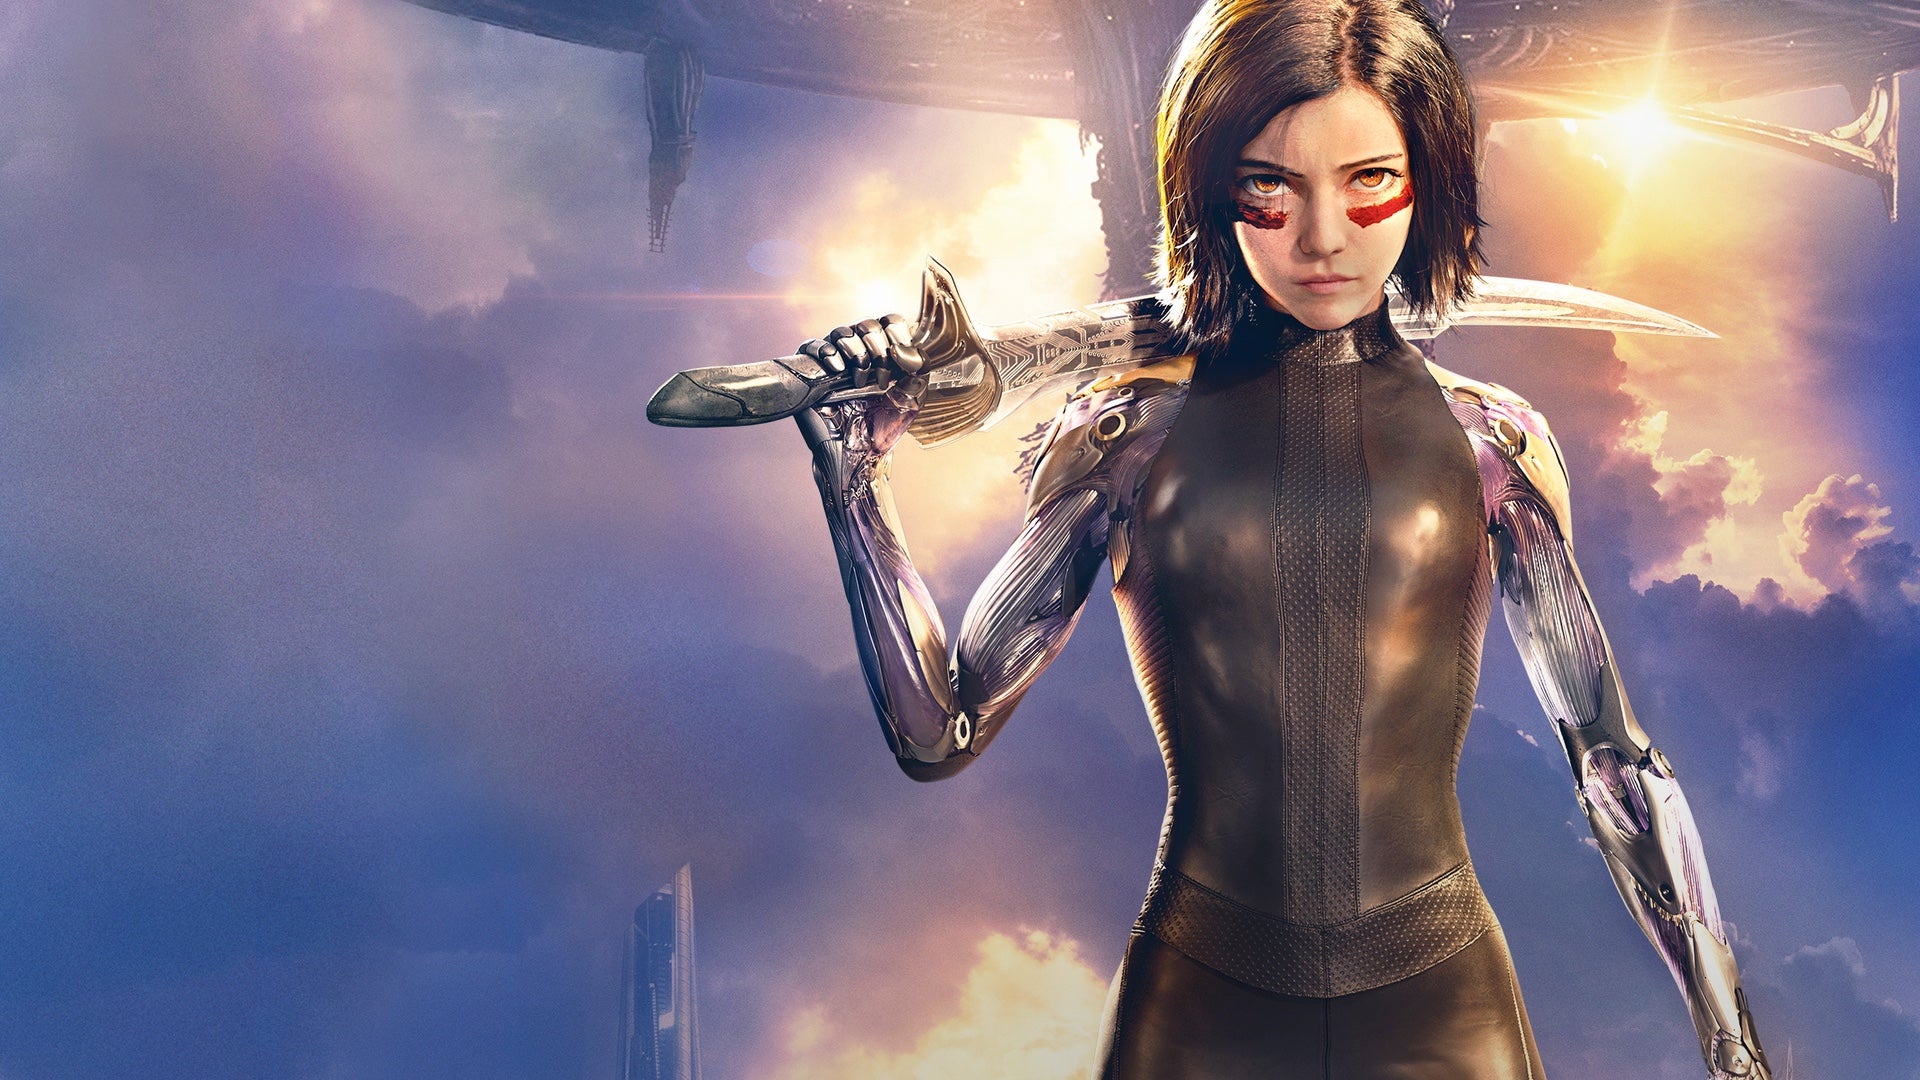 Alita: Battle Angel - Limited Edition Collector's Set